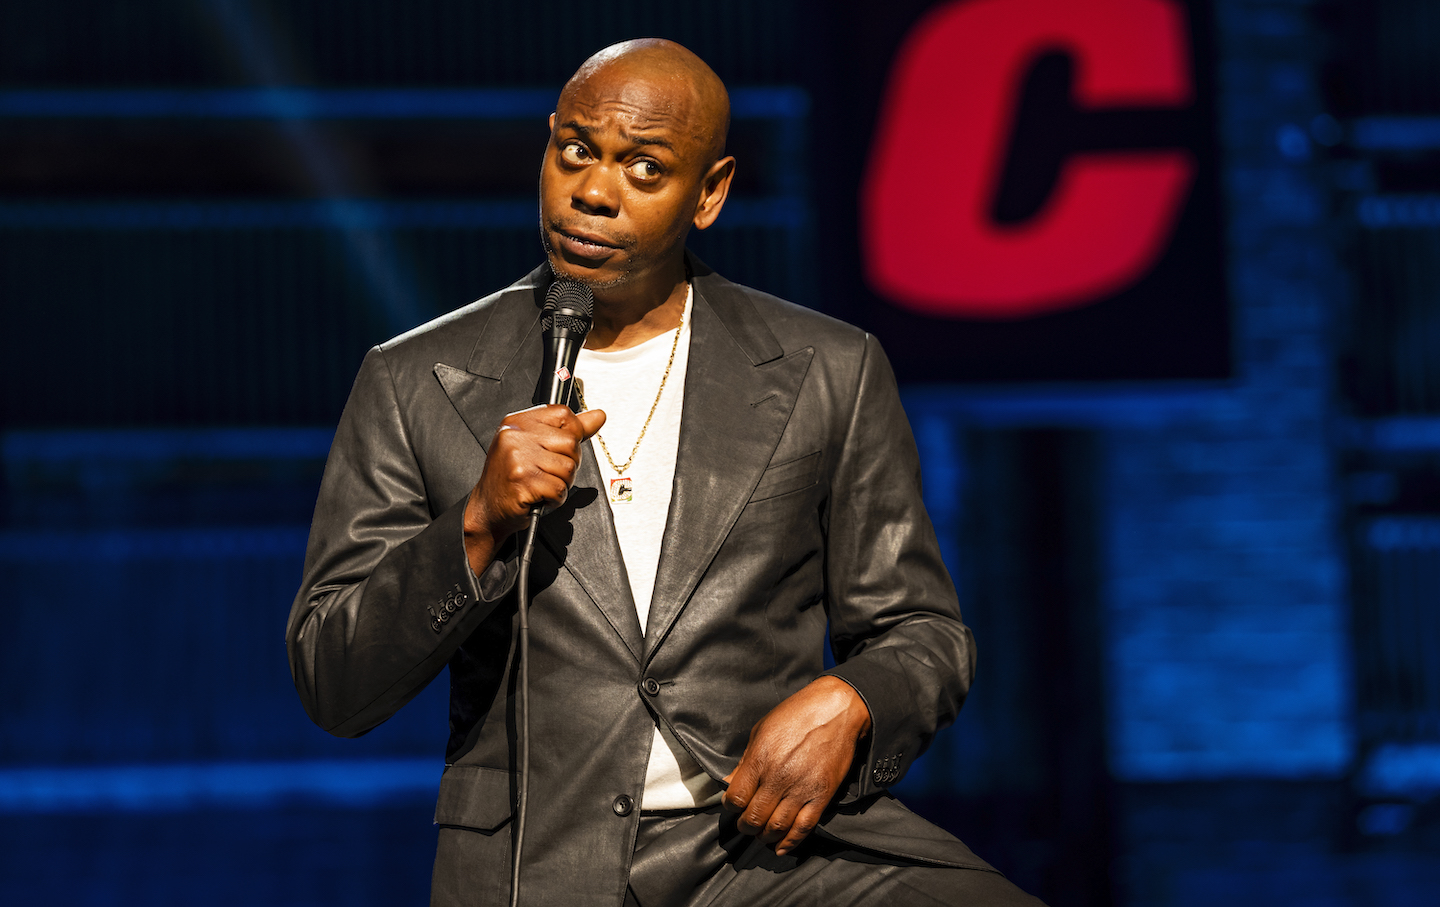 Dave Chappelle’s Comedy of Bitterness